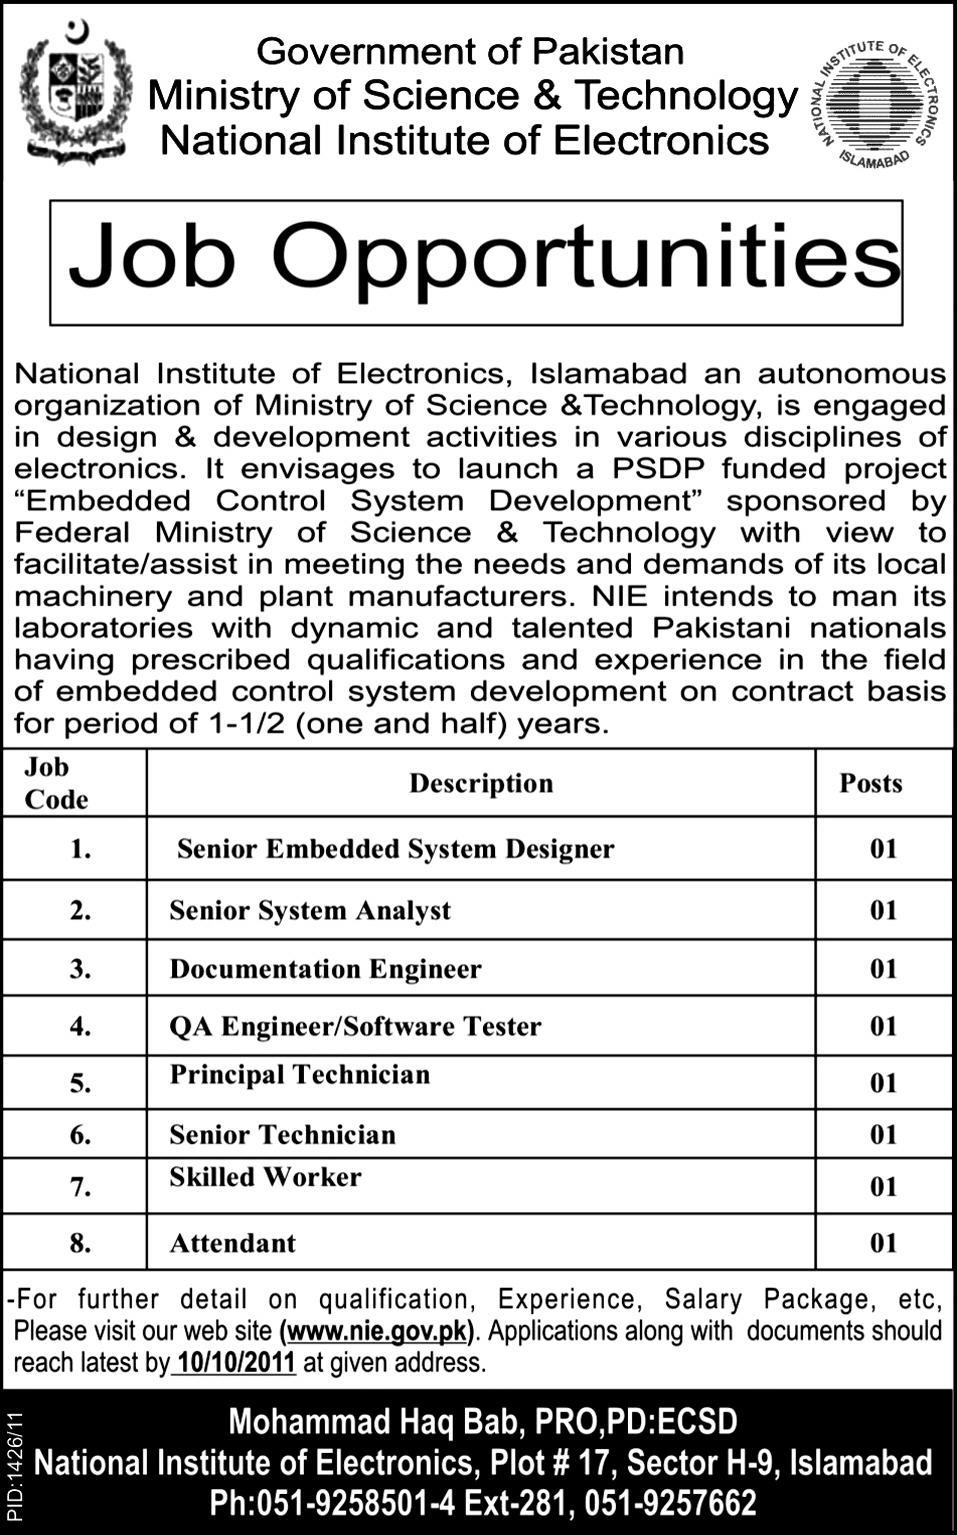 Ministry of Science & Technology, Government of Pakistan Job Opportunities